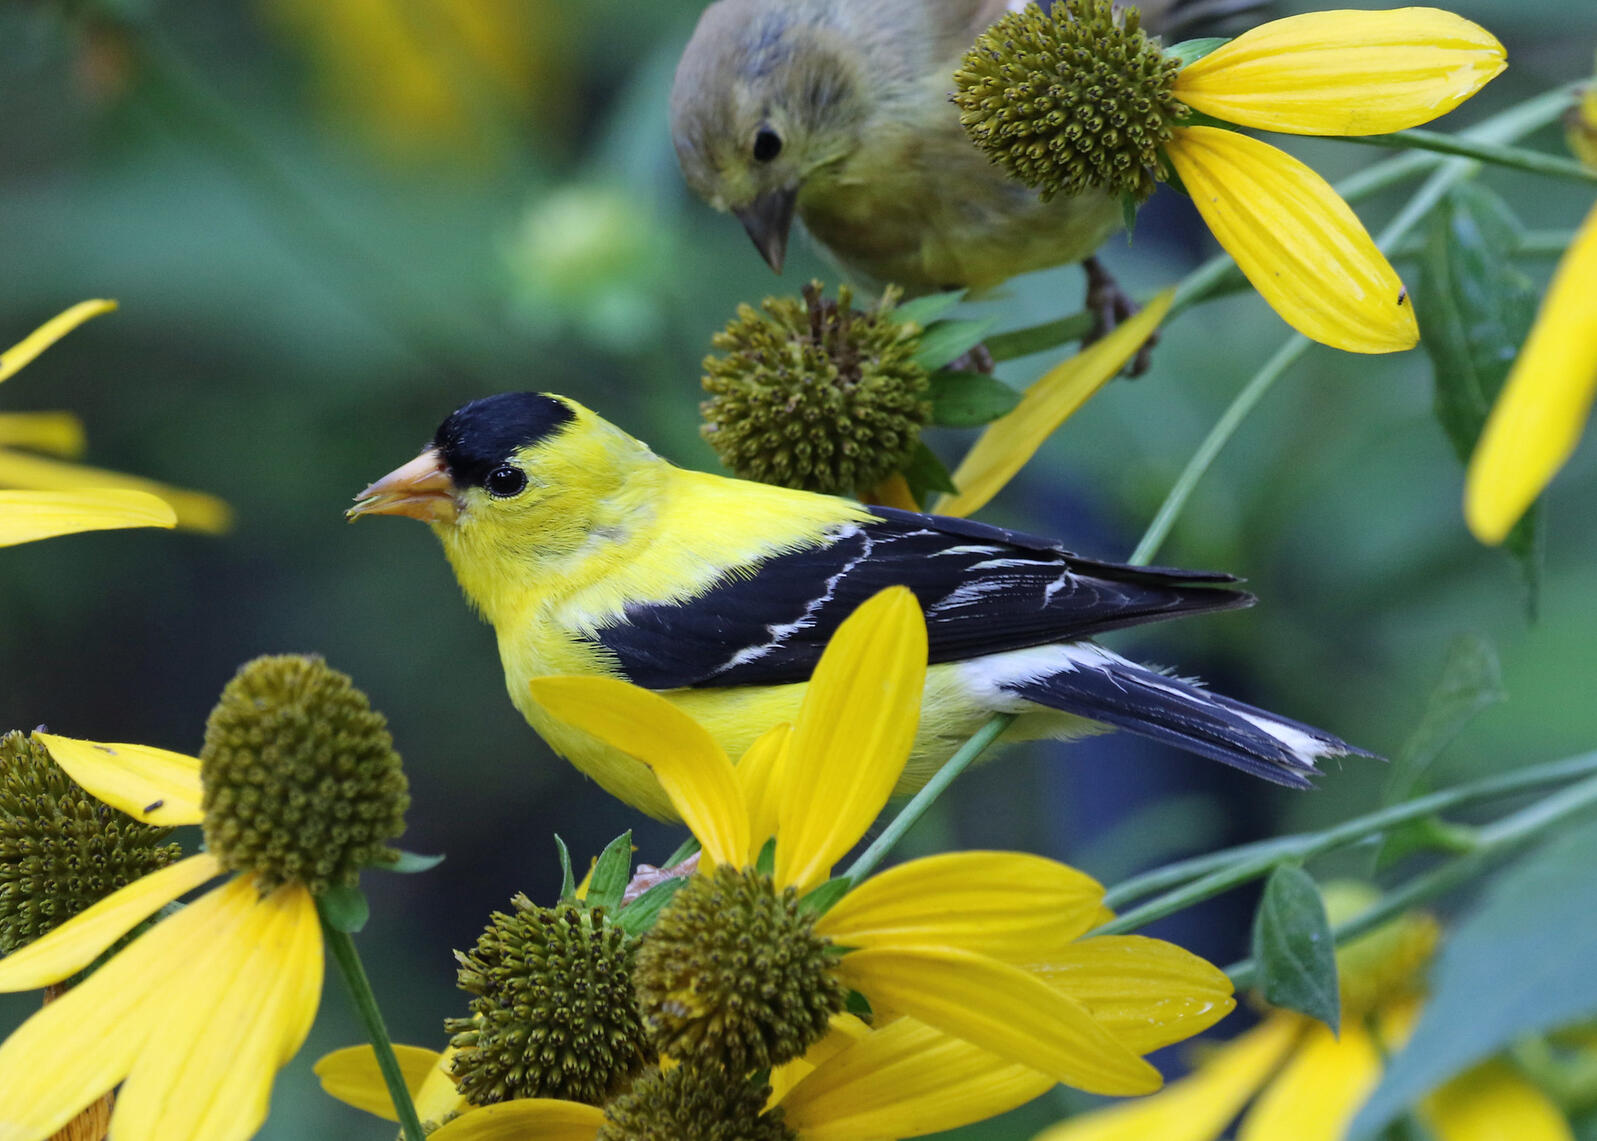 American Goldfinches (one male and one female) perched on Green-headed Coneflowers